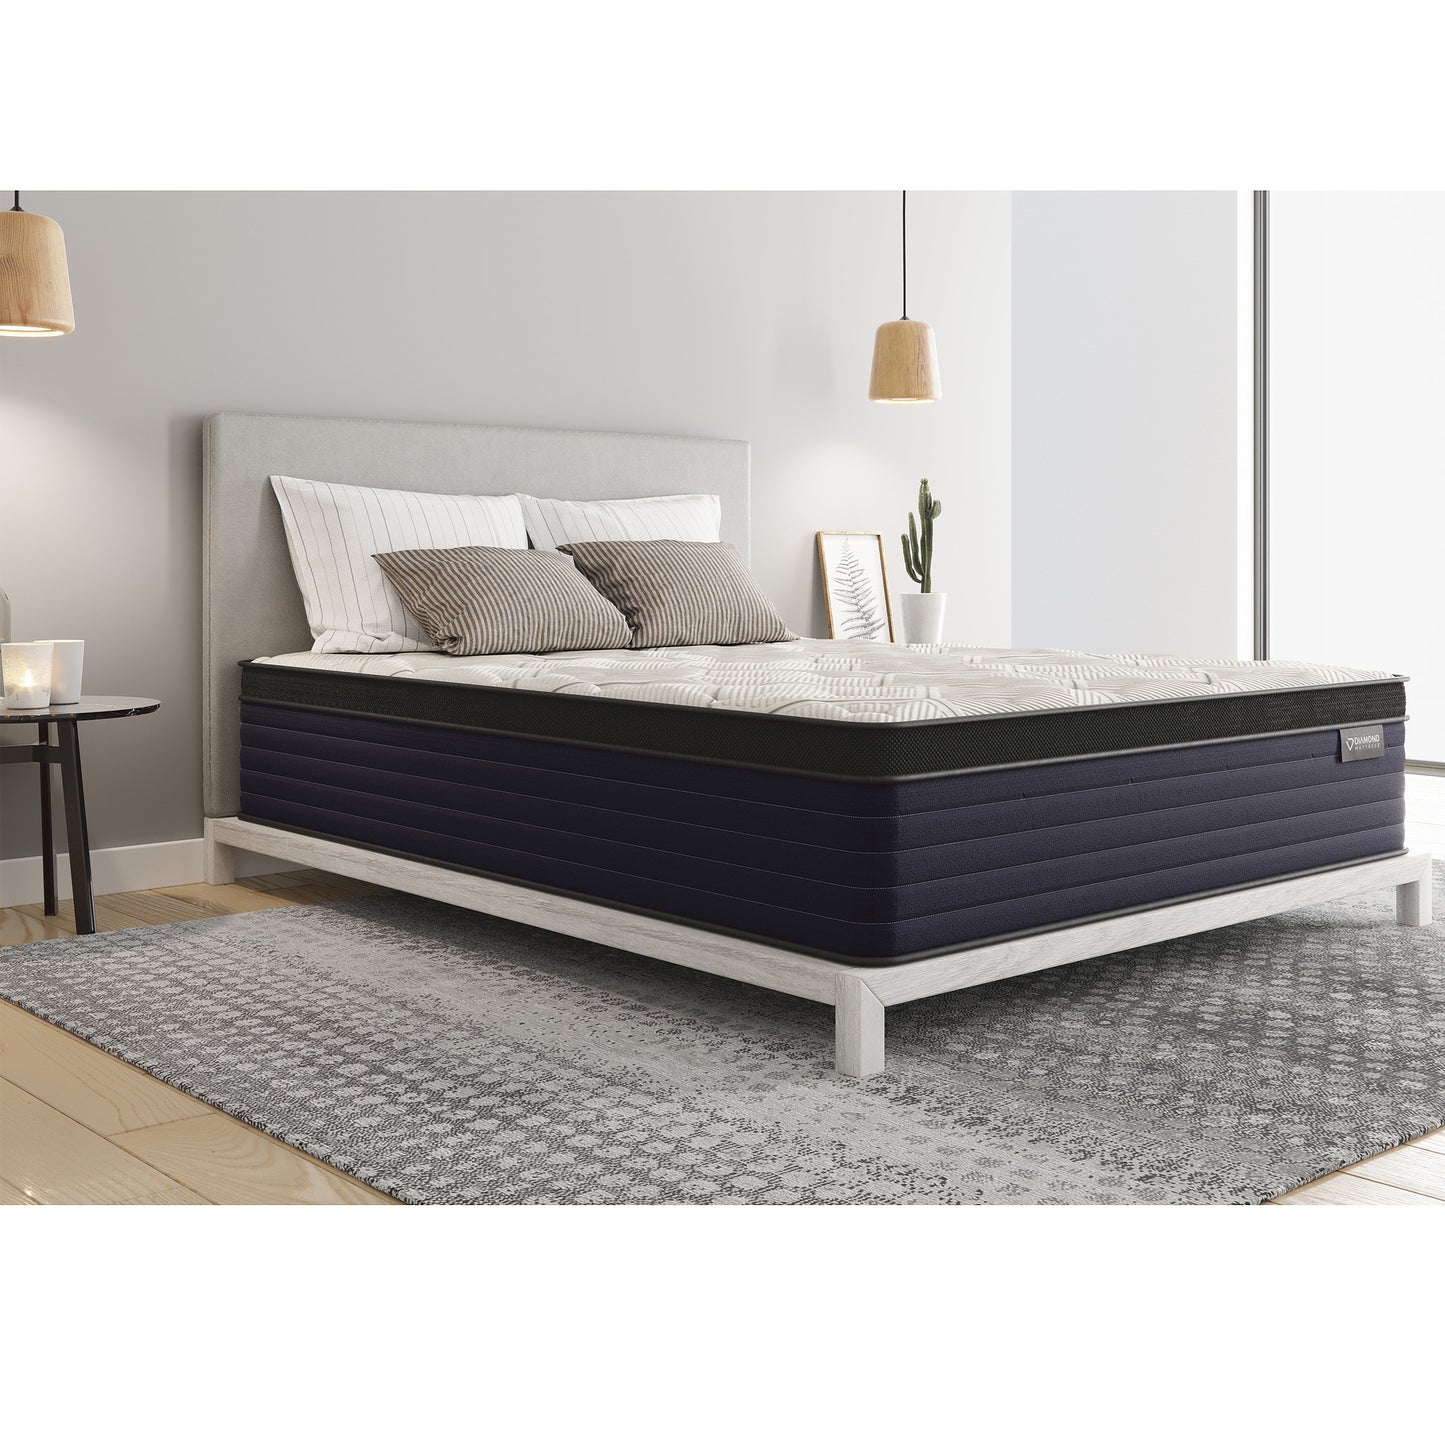 Everest Cool Copper Hybrid Euro-Top 14" Medium Firm Mattress (Compare to Caspers™  Wave Hybrid)